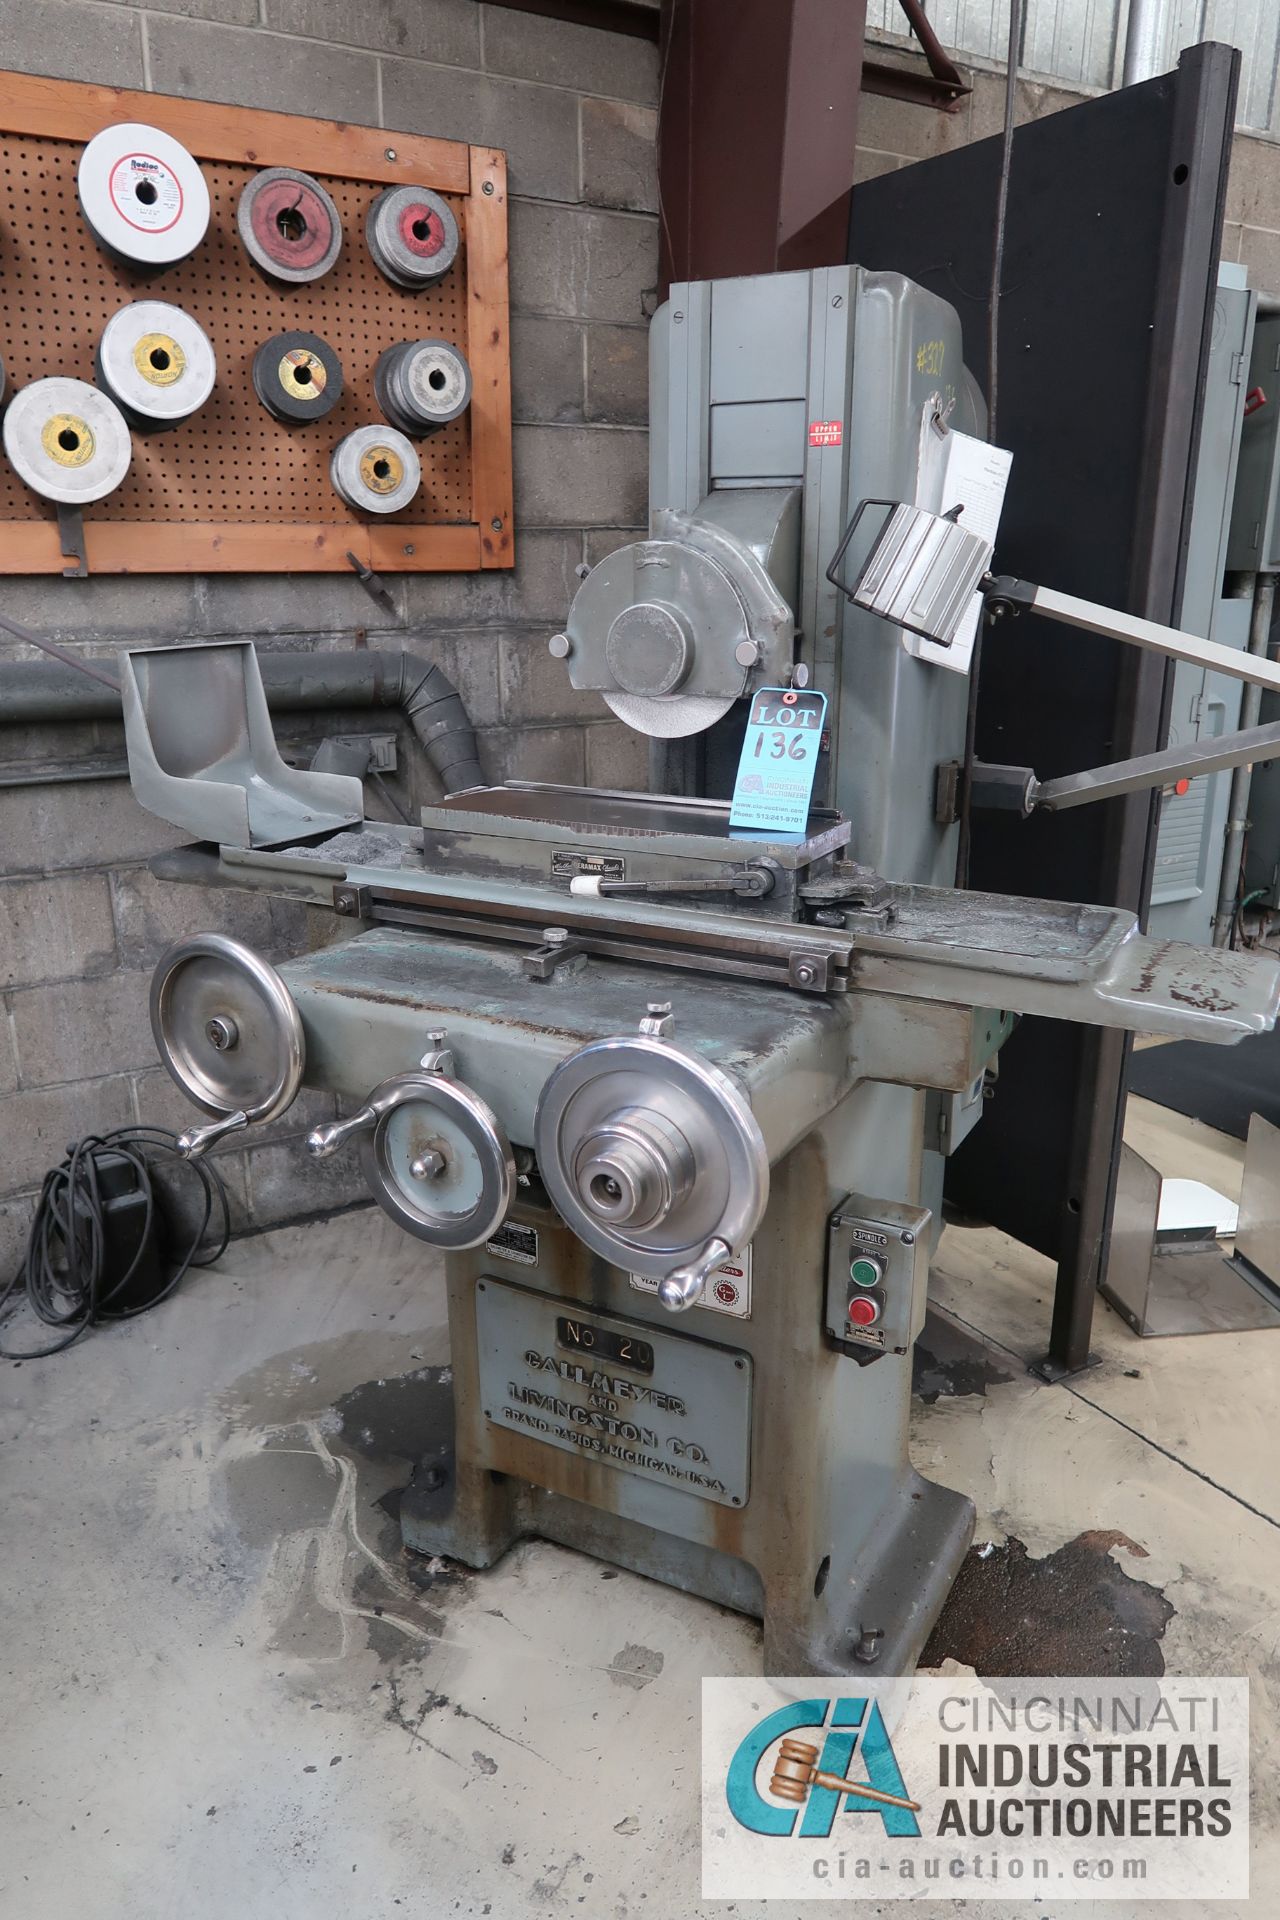 6" X 18" GALLMEYER AND LIVINGSTON MODEL 20 HAND FEED SURFACE GRINDER; S/N S-20159 *NEW 1965*